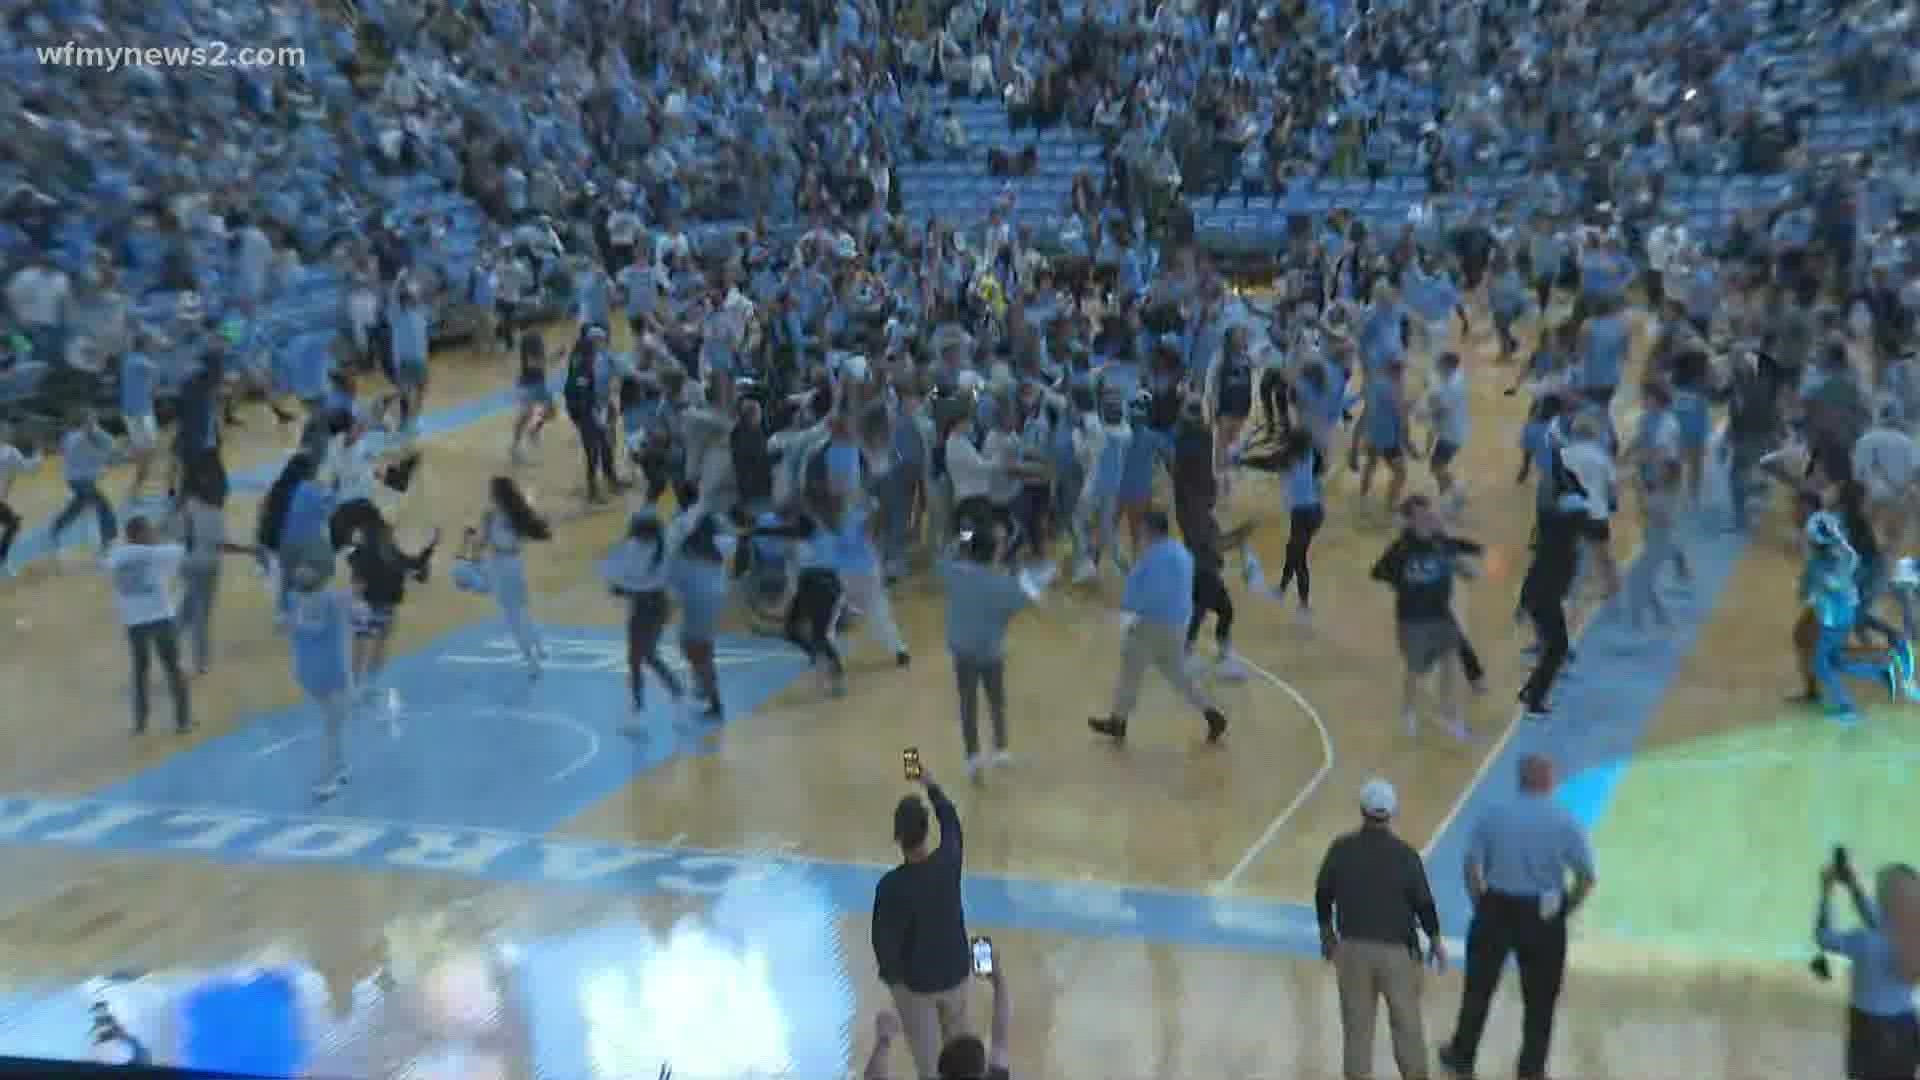 It was a historic game, and UNC came out on top, 81 to 77.